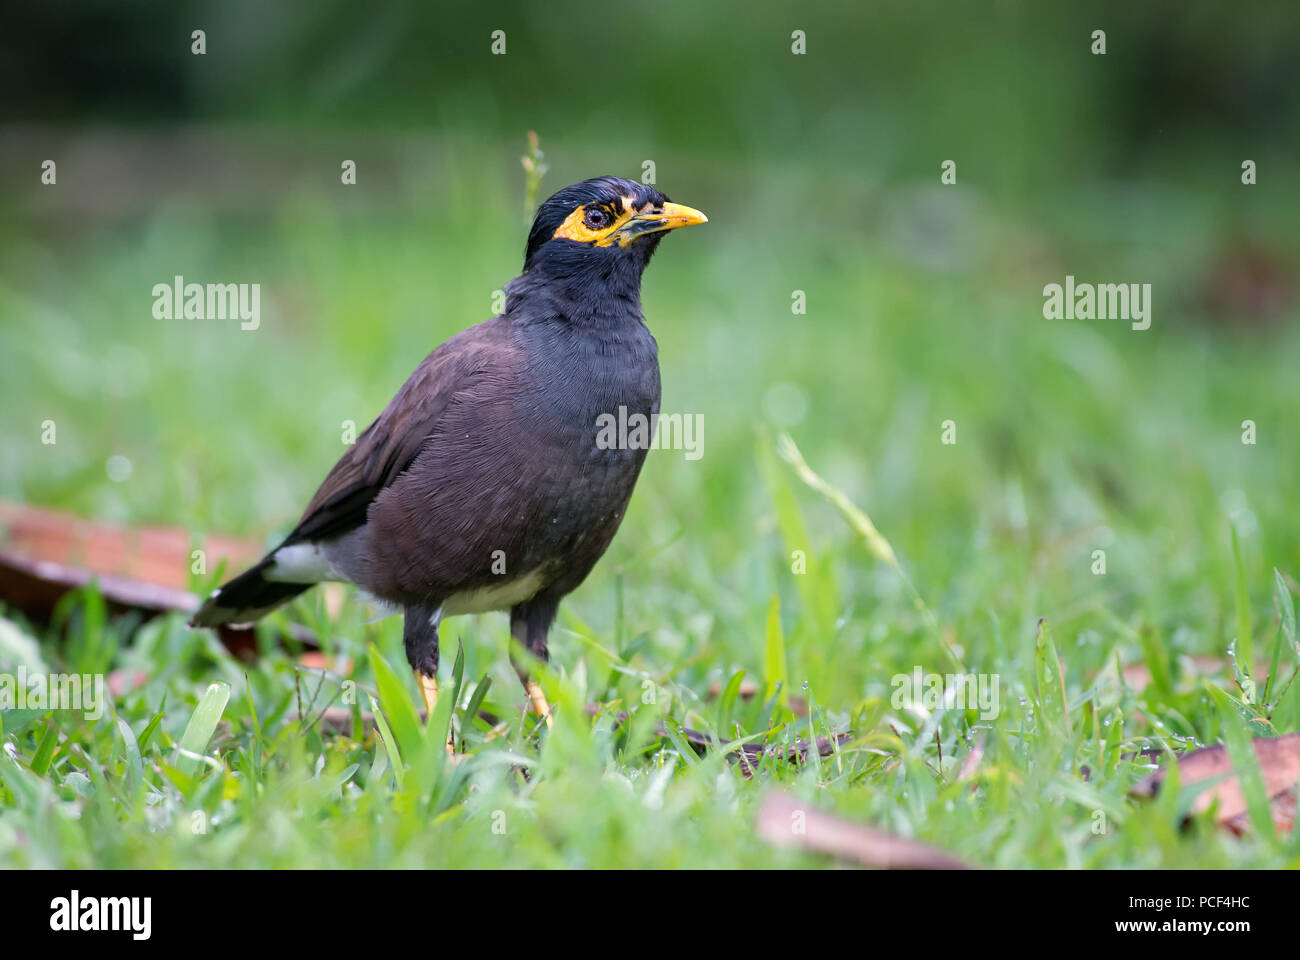 Common Myna - Acridotheres tristis, common perching bird from Asian gardens and woodlands, Sri Lanka. Stock Photo